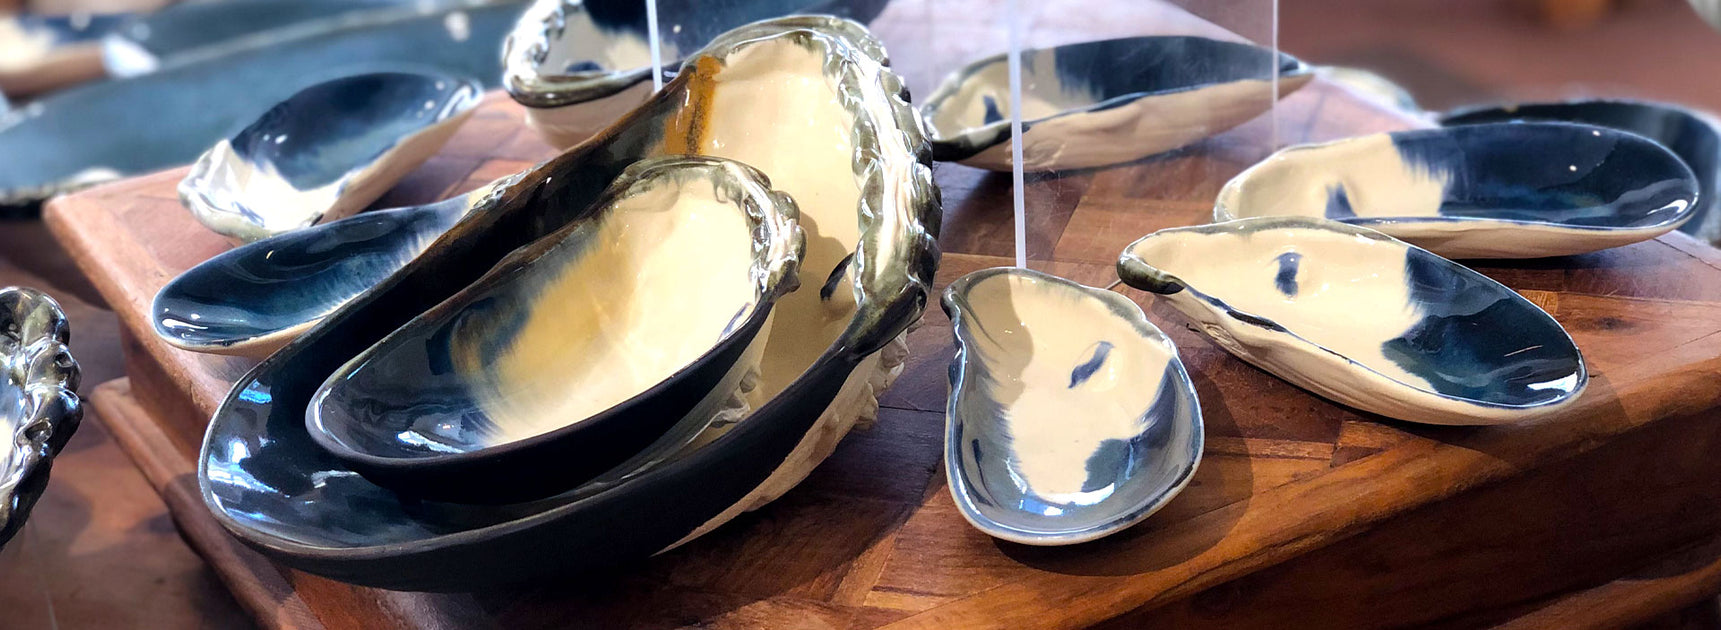 Mussels & More – Chatham Pottery